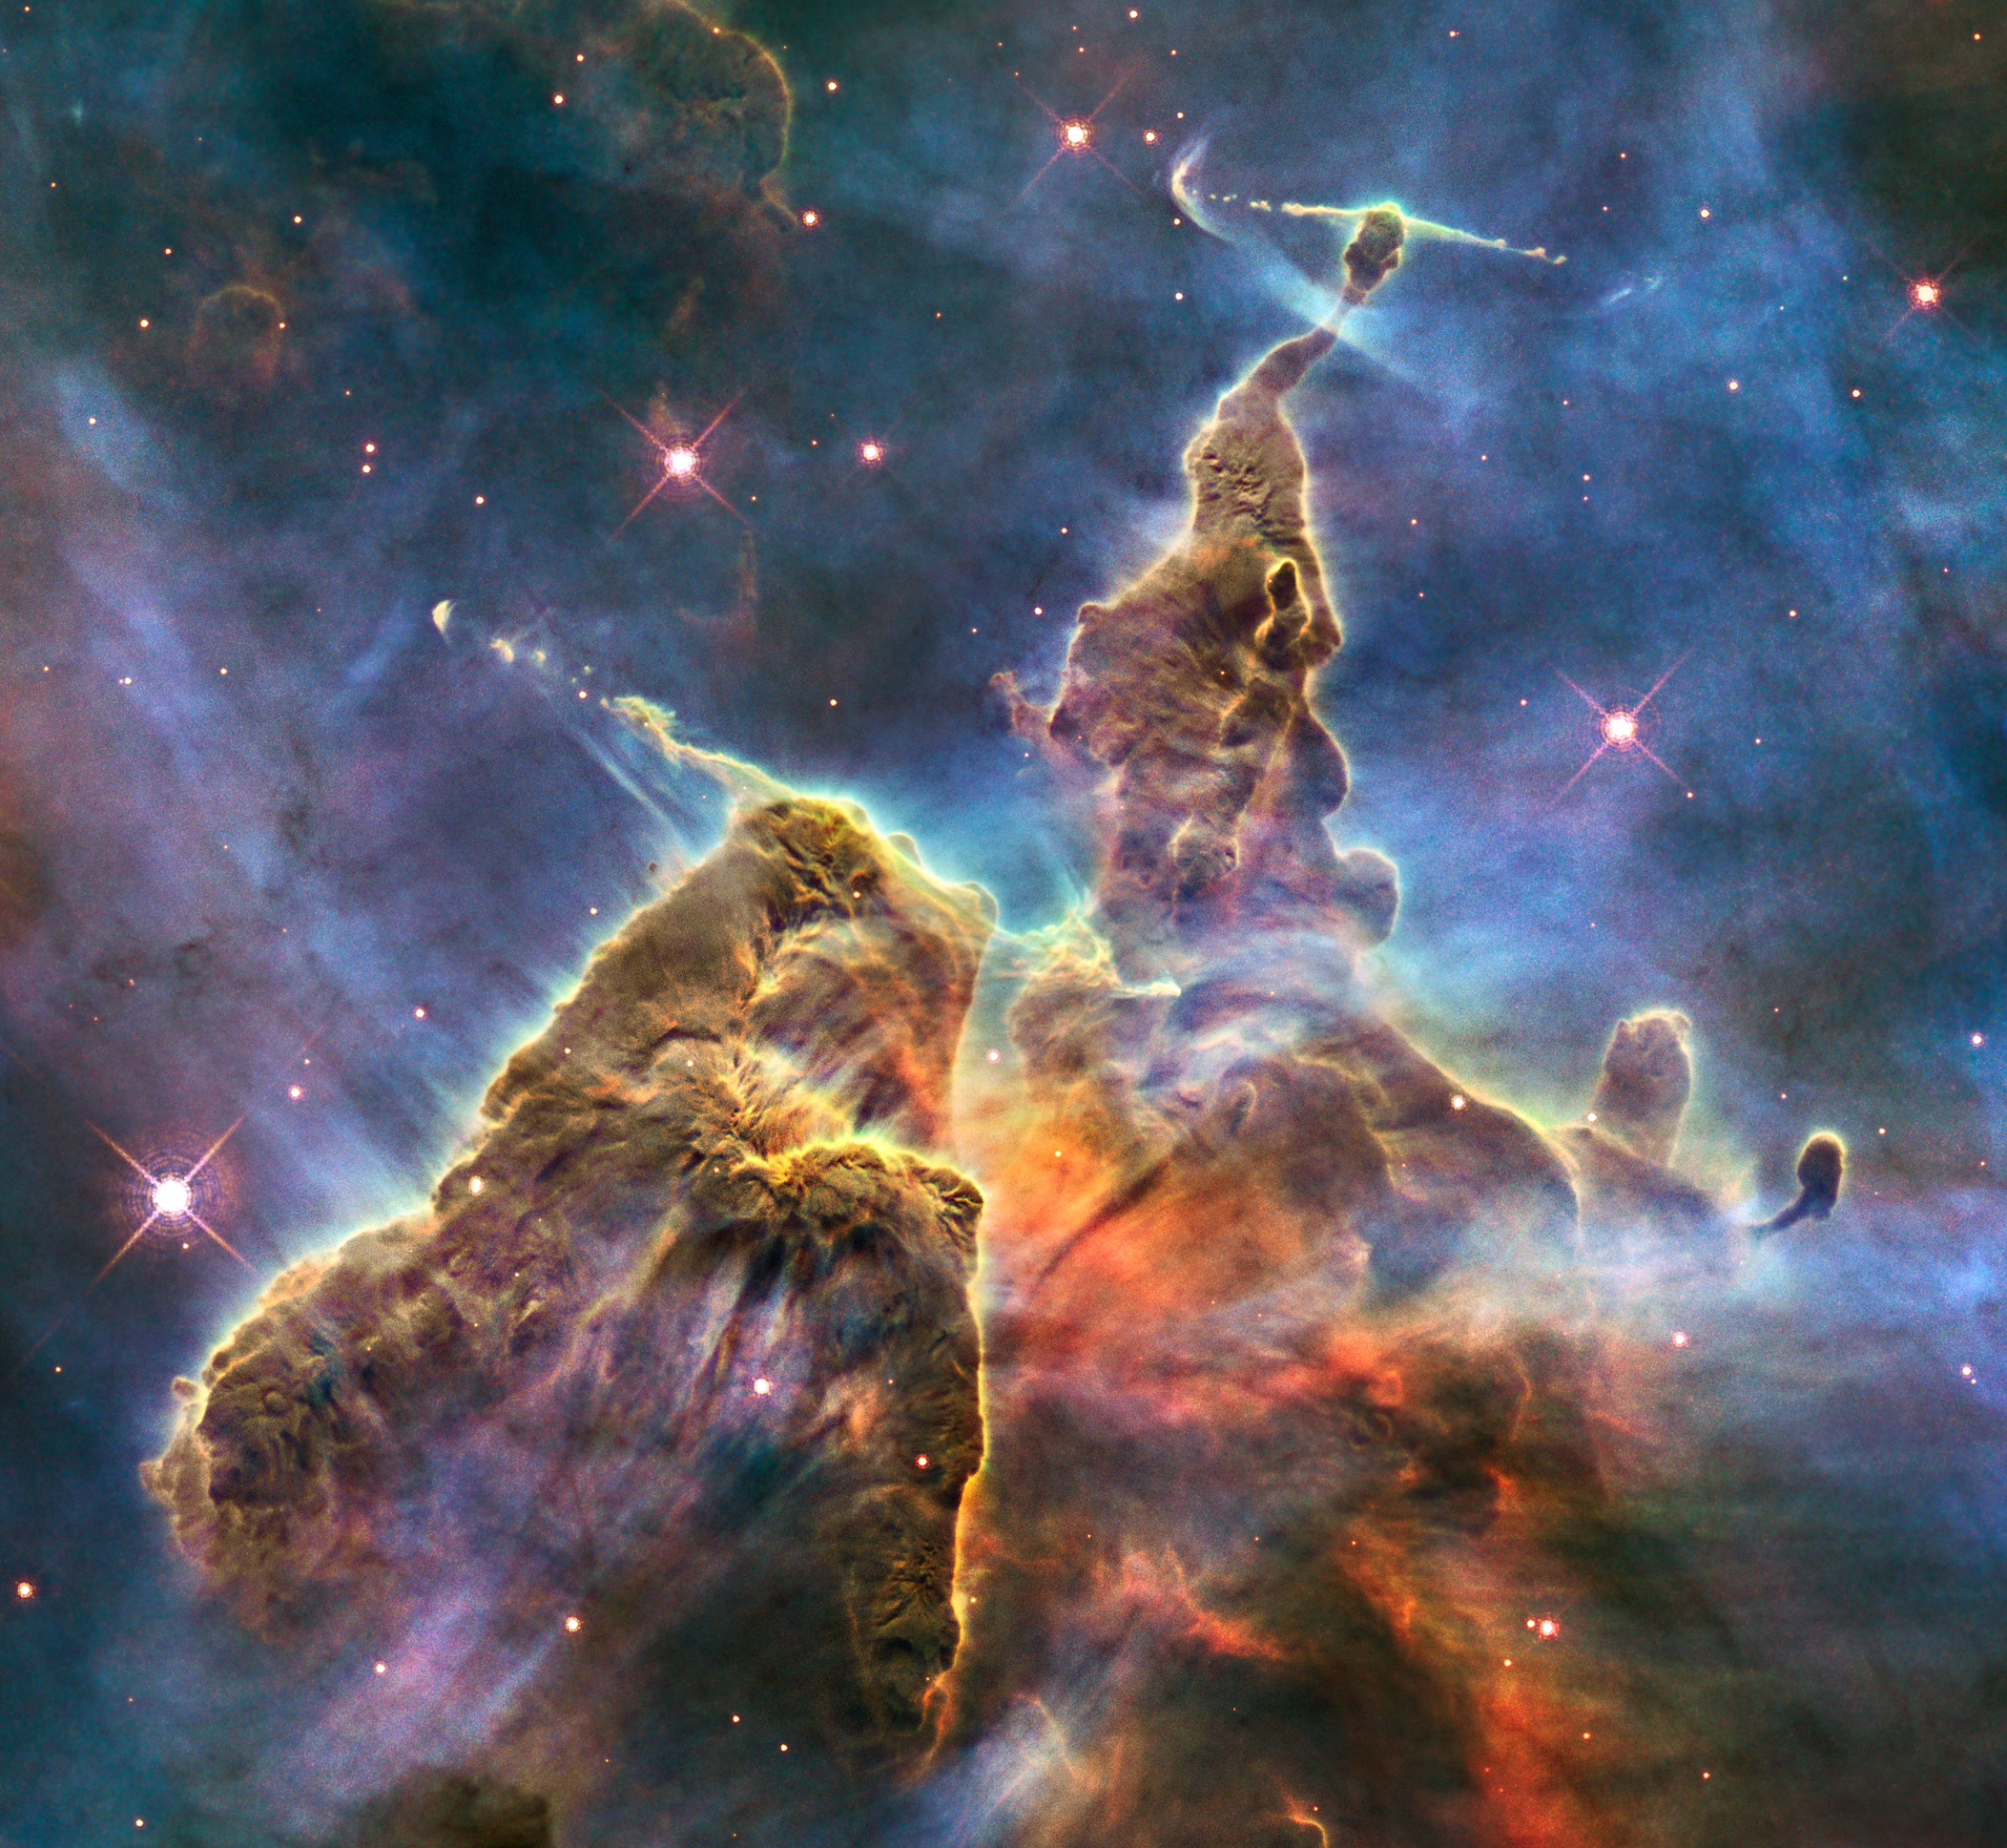 HH_901_and_HH_902_in_the_Carina_nebula_(captured_by_the_Hubble_Space_Telescope)